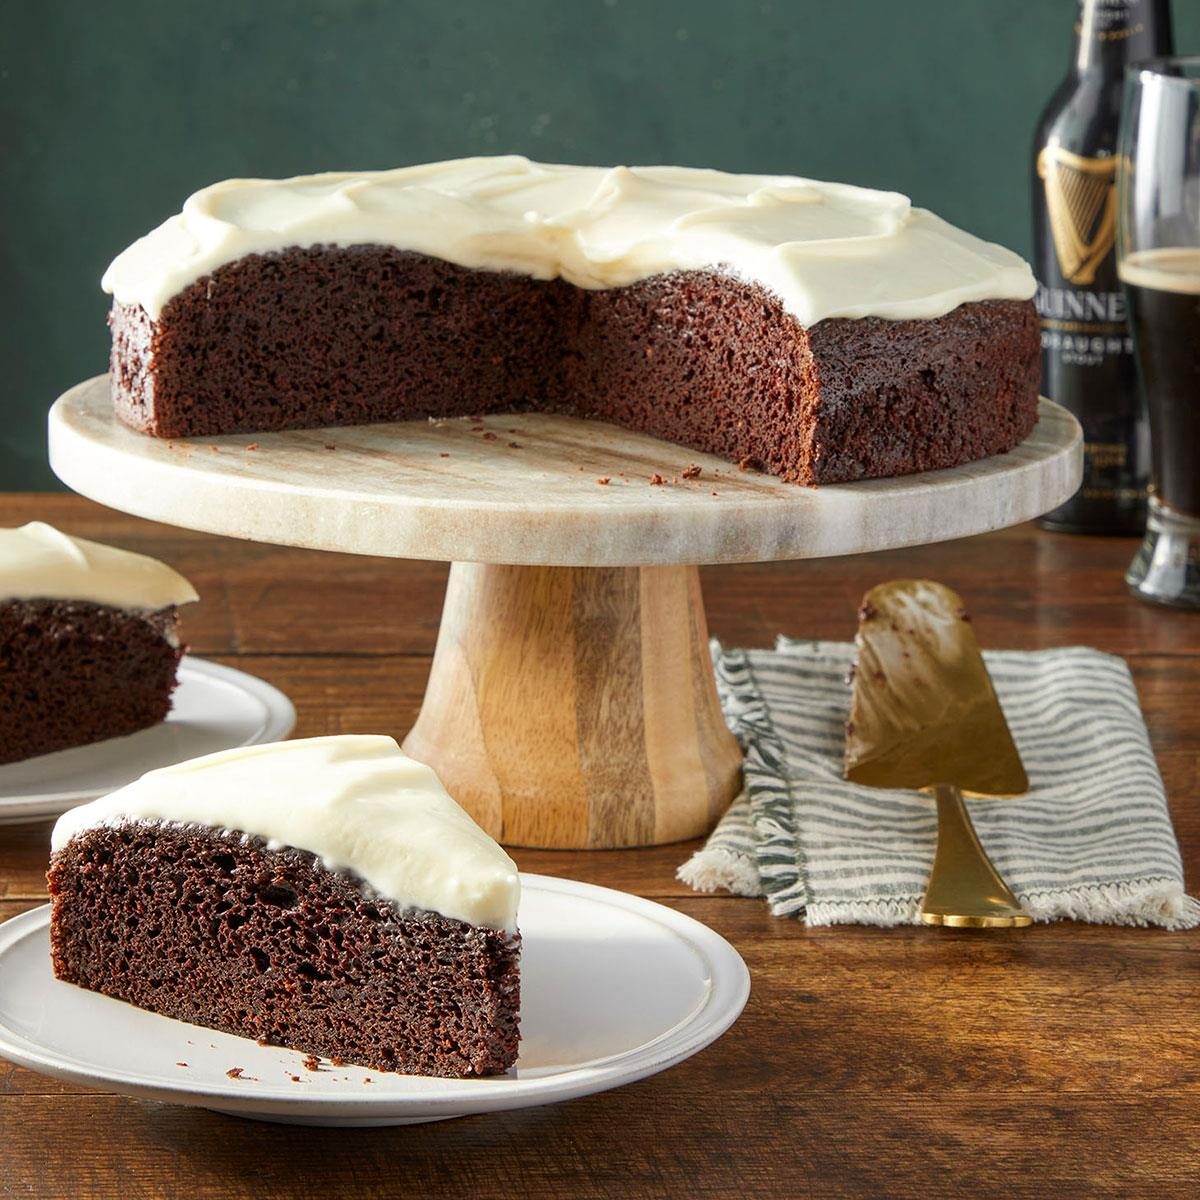 <p>One bite and everyone will propose a toast to this silky-smooth chocolate Guinness cake. The cream cheese frosting reminds me of the foamy head on a perfectly poured pint. —Marjorie Hennig, Seymour, Indiana</p> <div class="listicle-page__buttons"> <div class="listicle-page__cta-button"><a href='https://www.tasteofhome.com/recipes/chocolate-guinness-cake/'>Go to Recipe</a></div> </div>